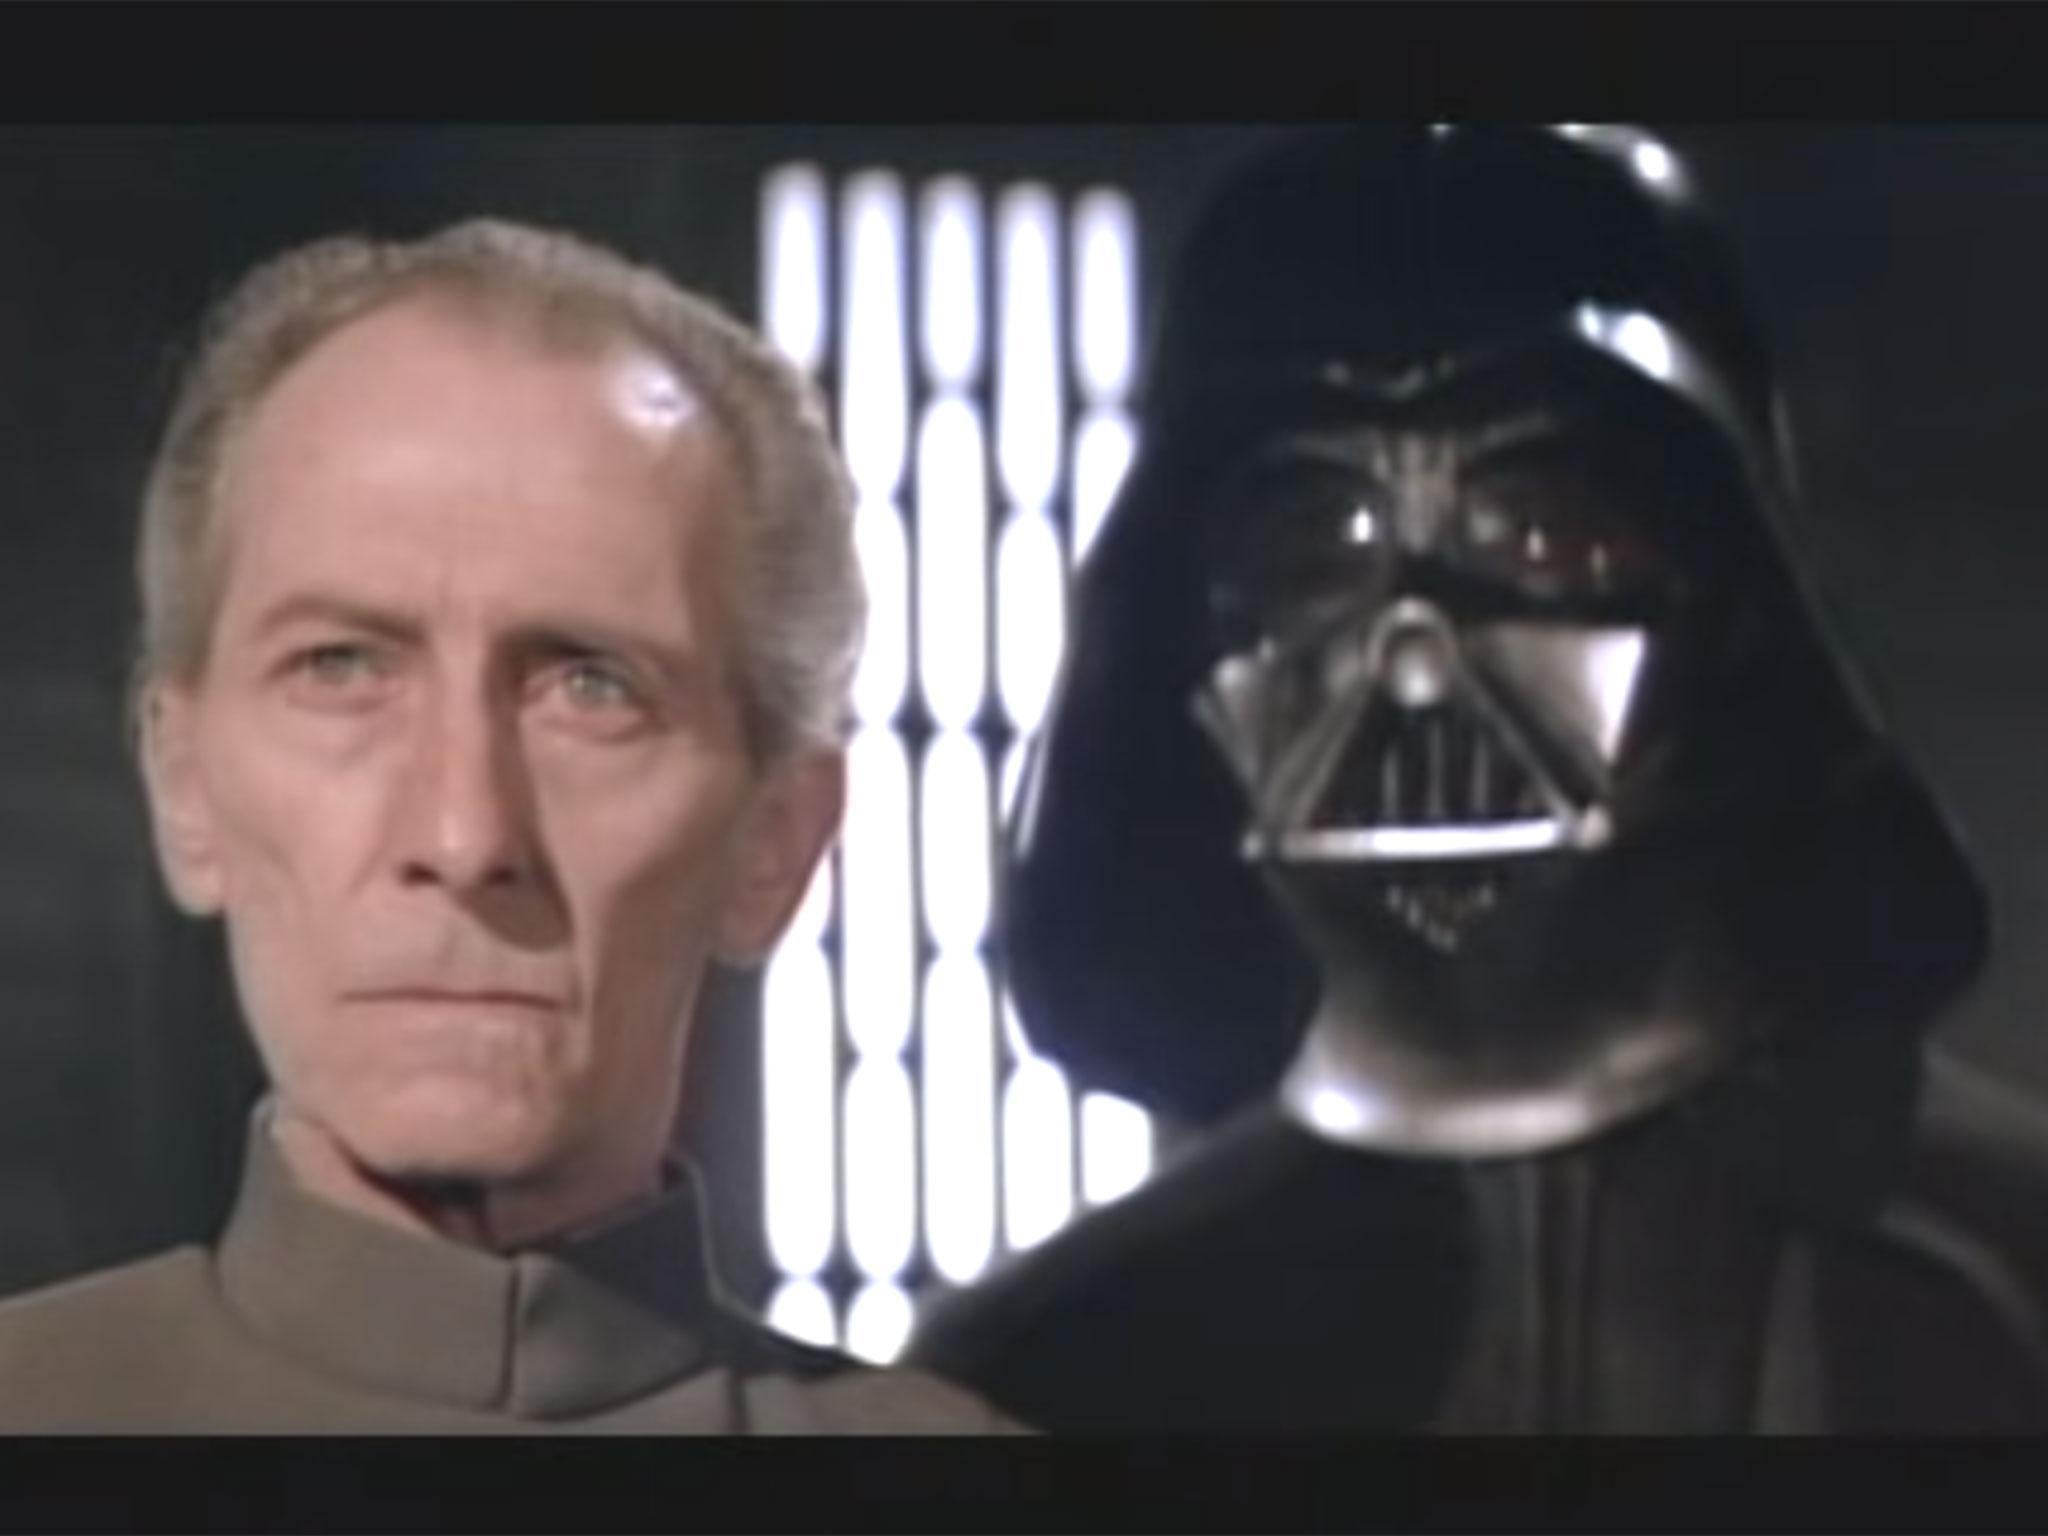 Peter Cushing played Grand Moff Tarkin as Commander of the Death Star in the first Star Wars film